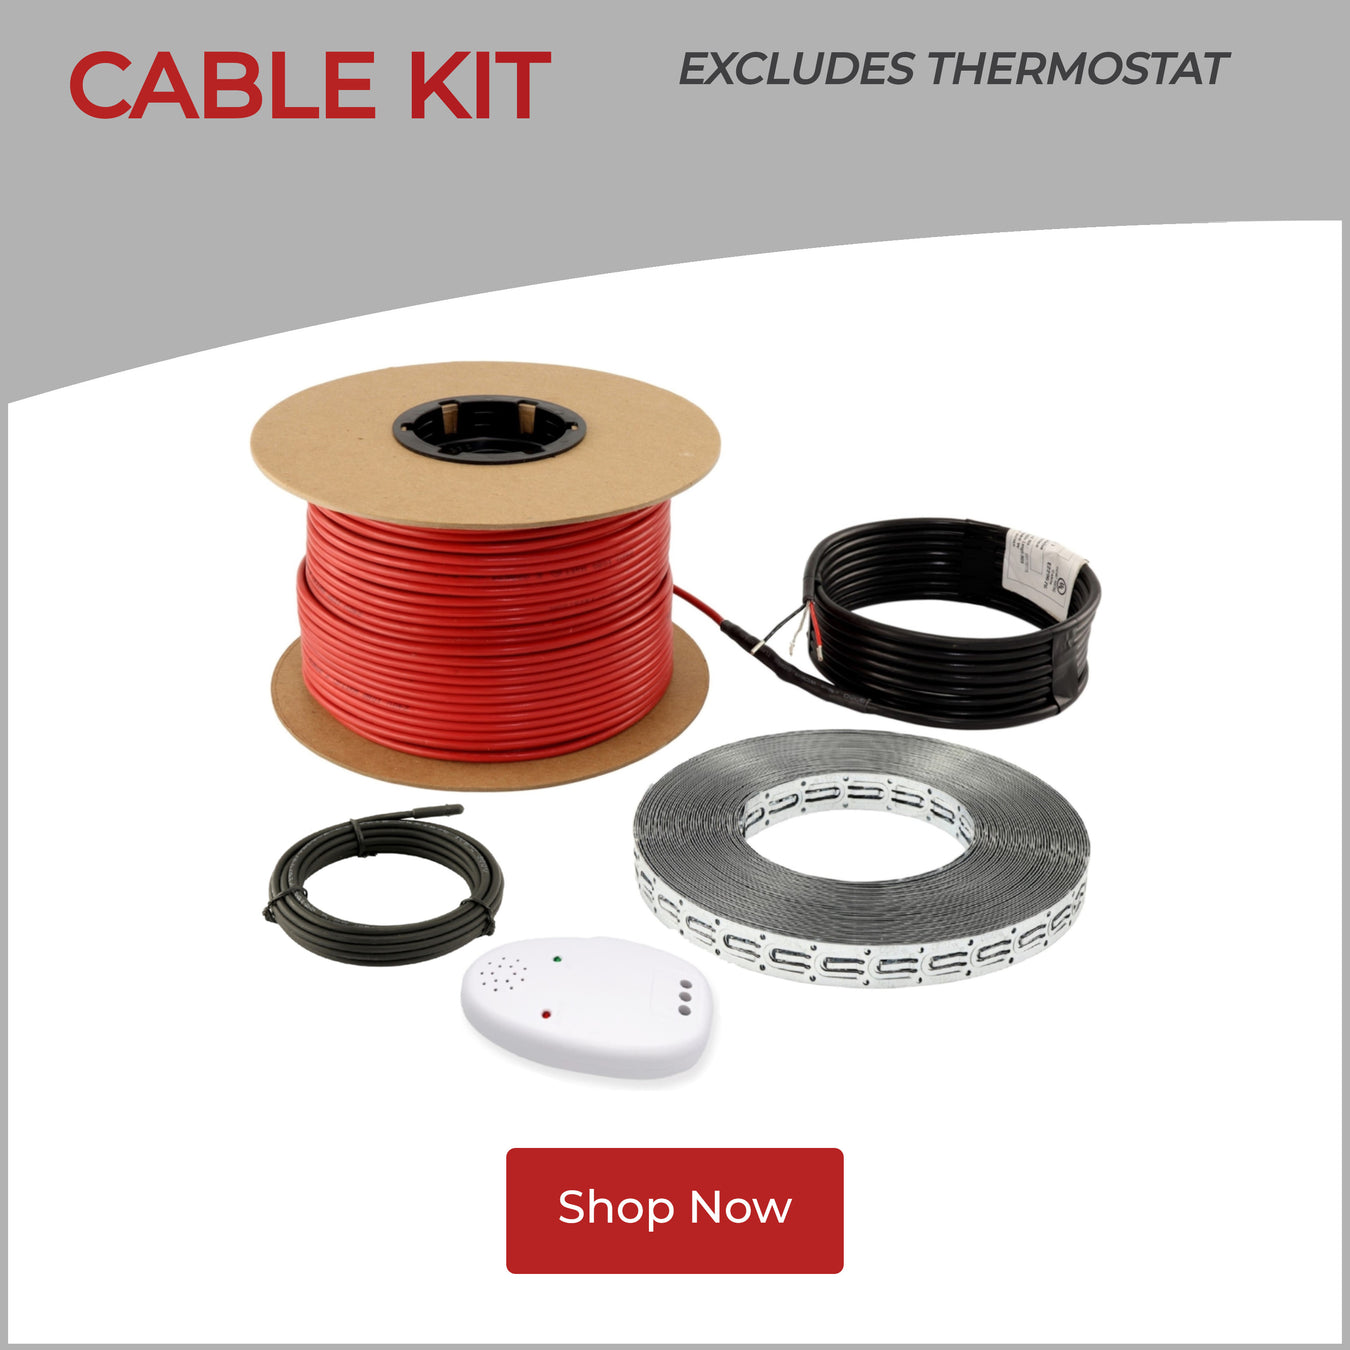 Overview_-_Cable_Kit_with_Strapping